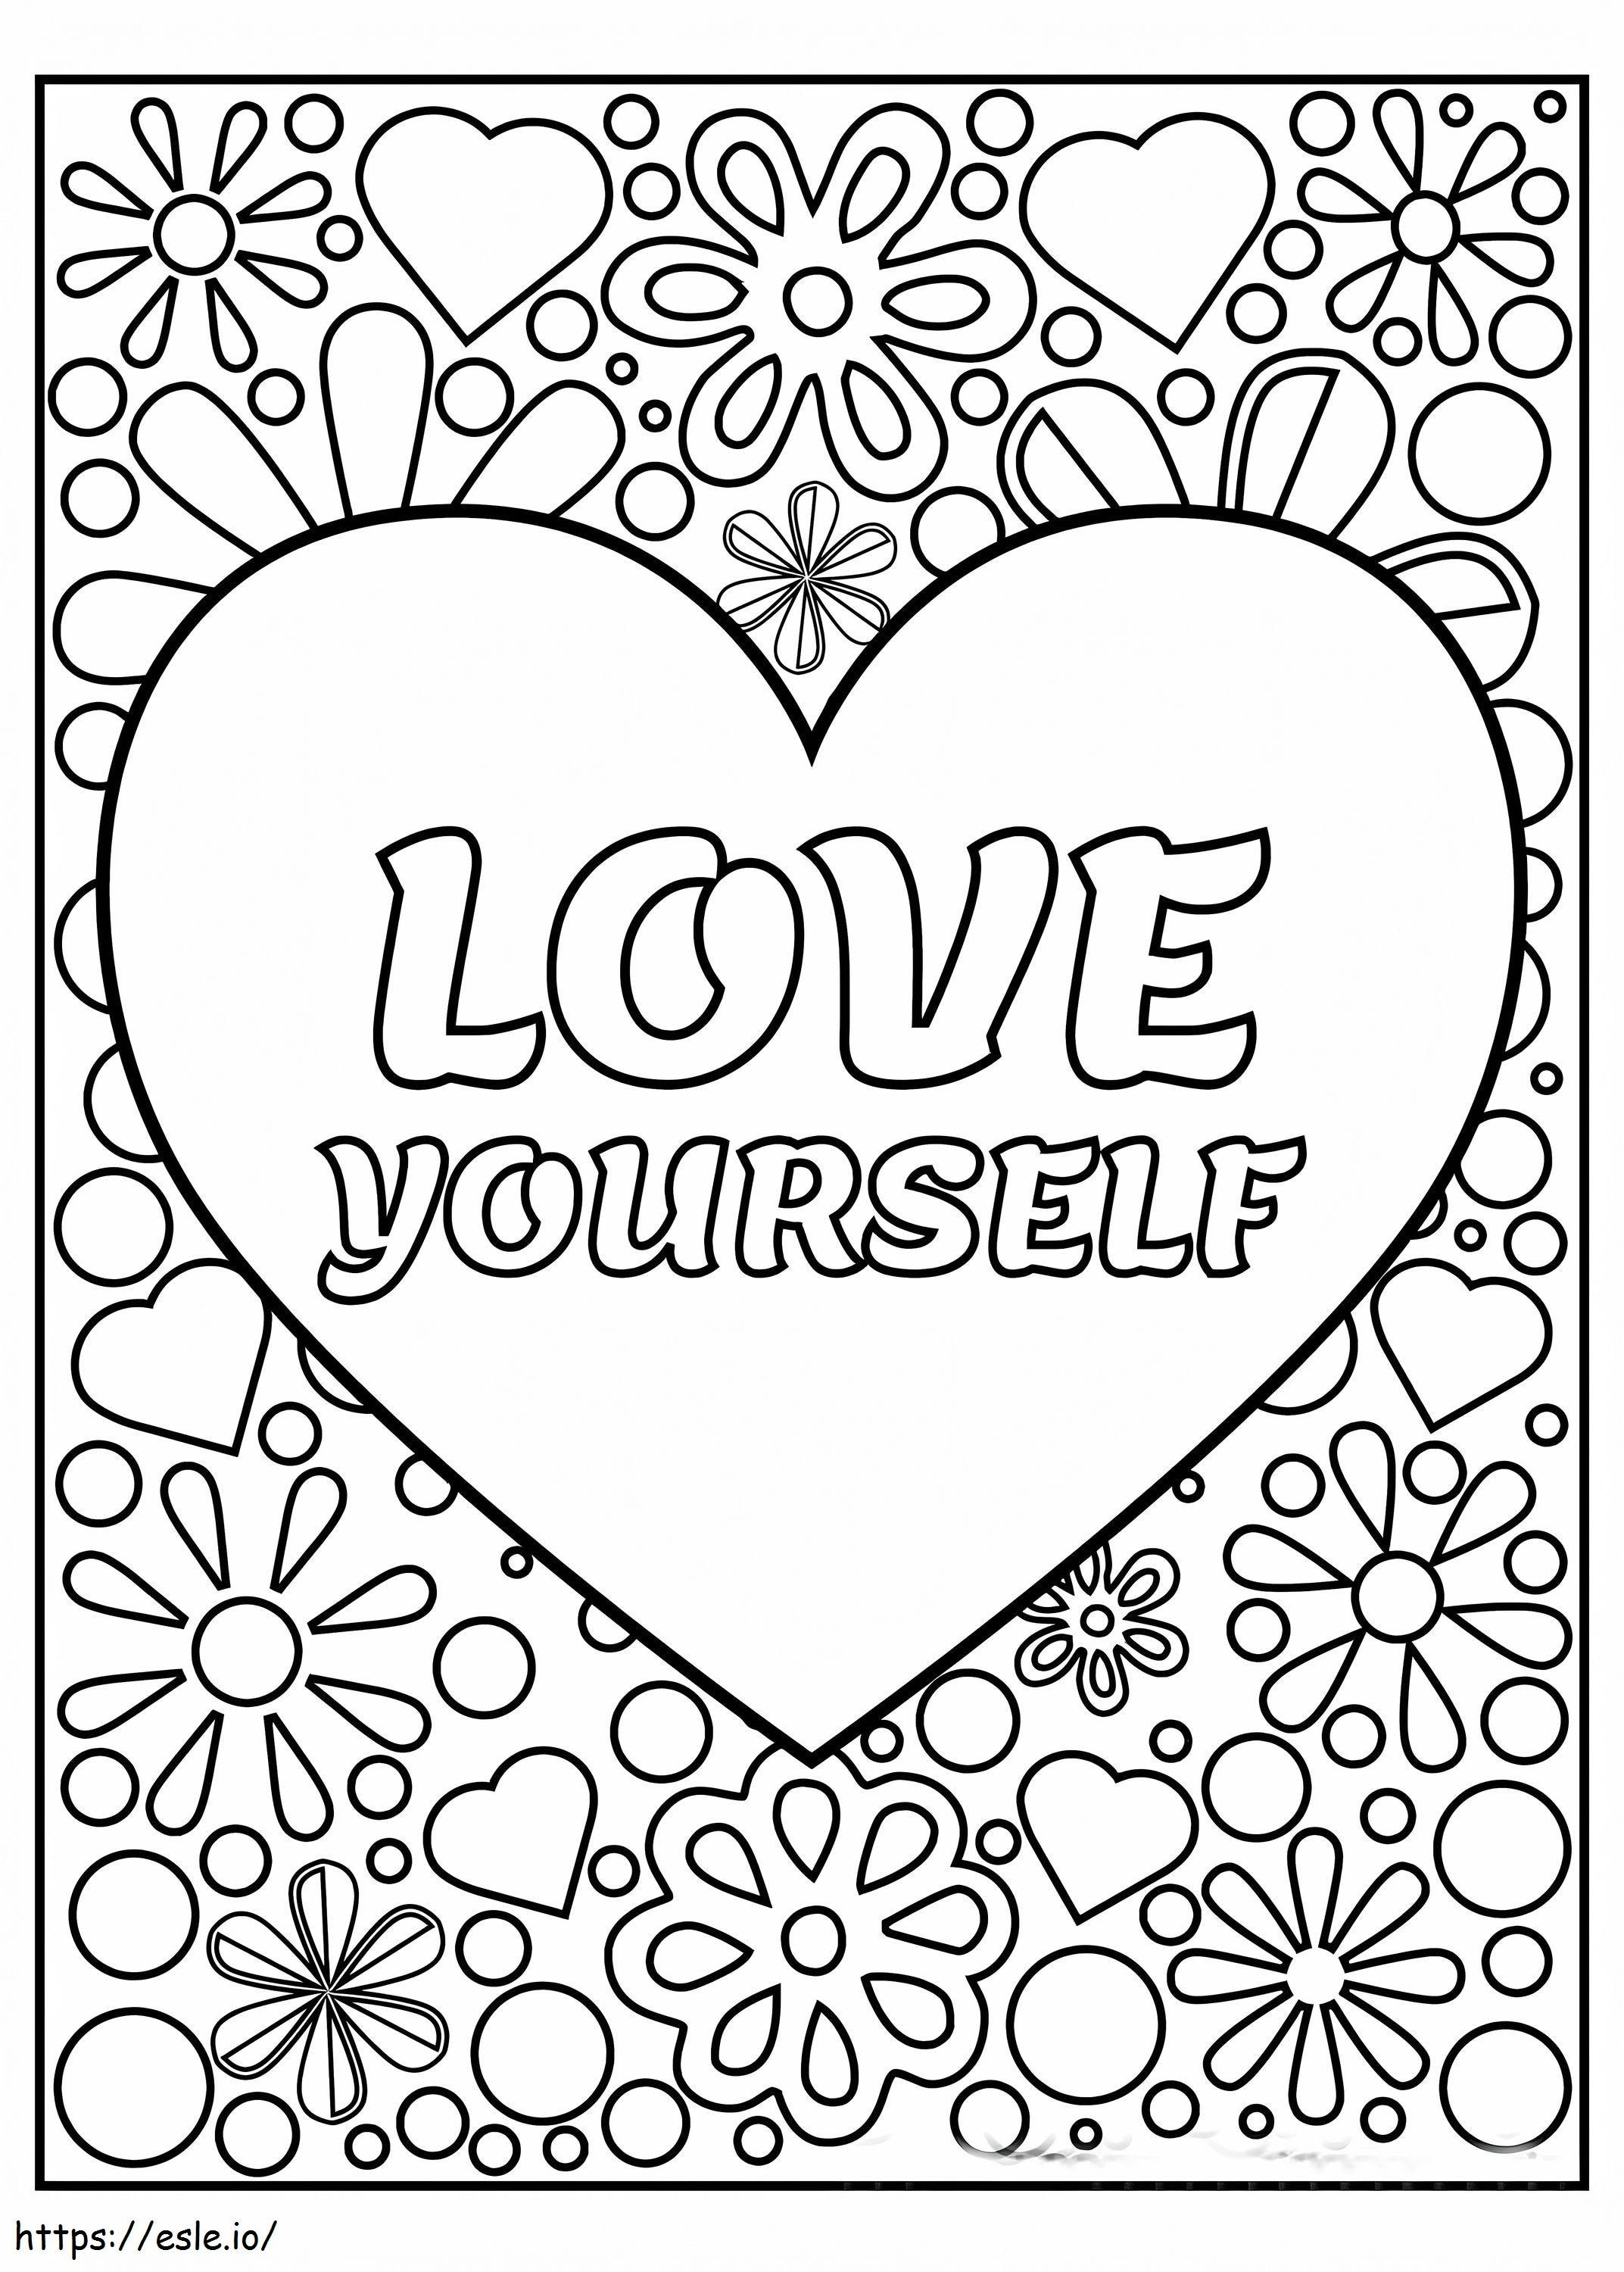 Love Yourself coloring page